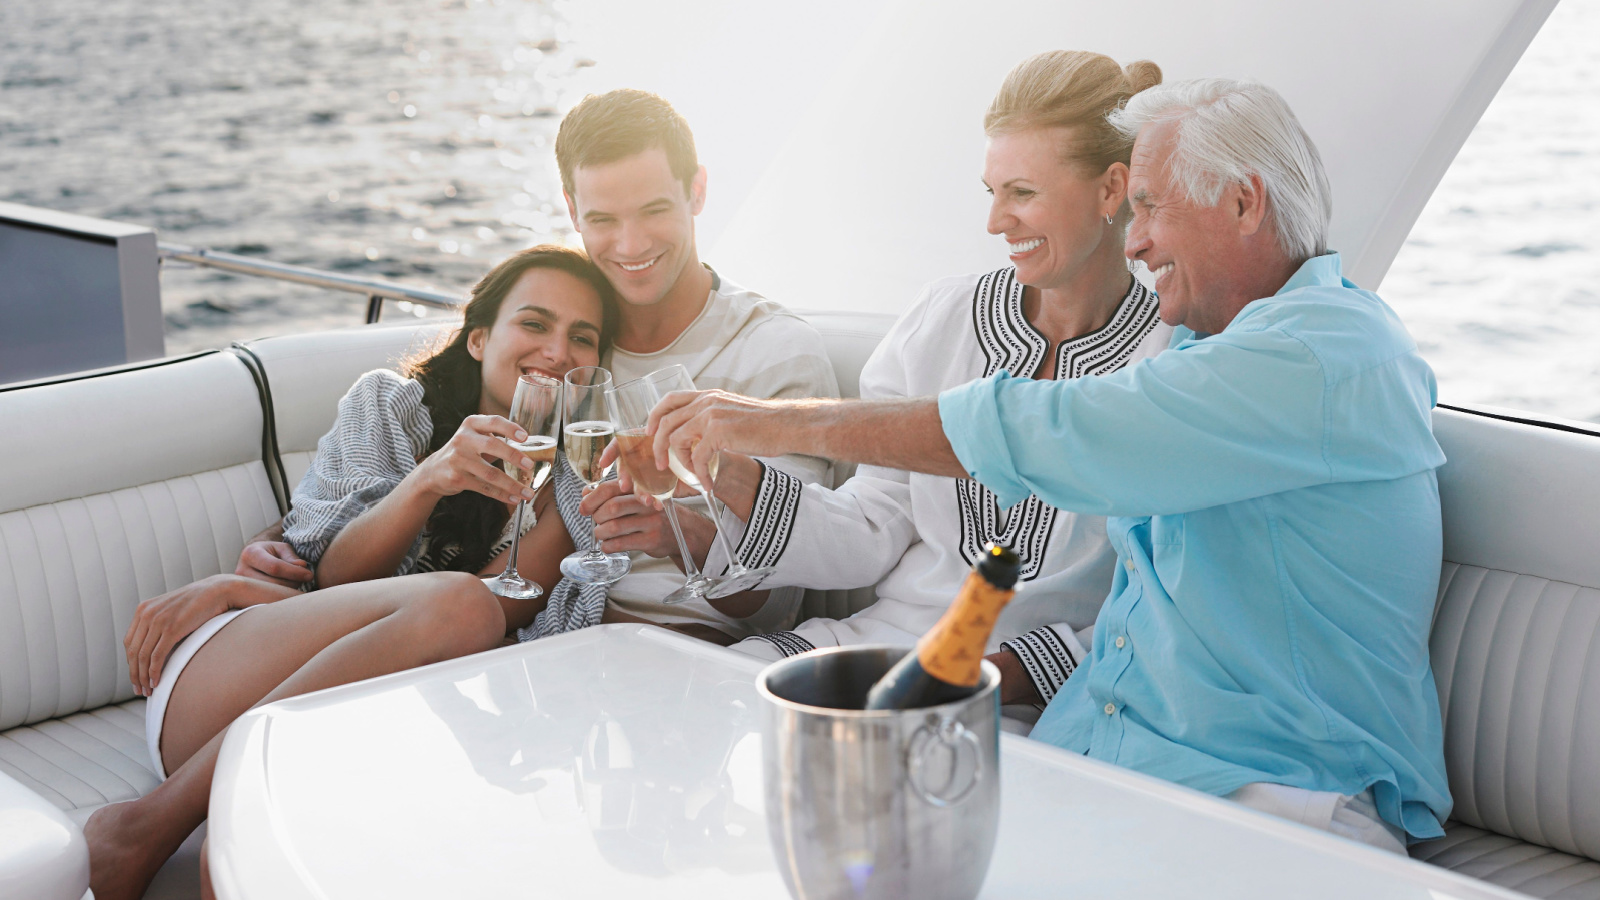 rich family cruising on a yacht sir travel alot shutterstock